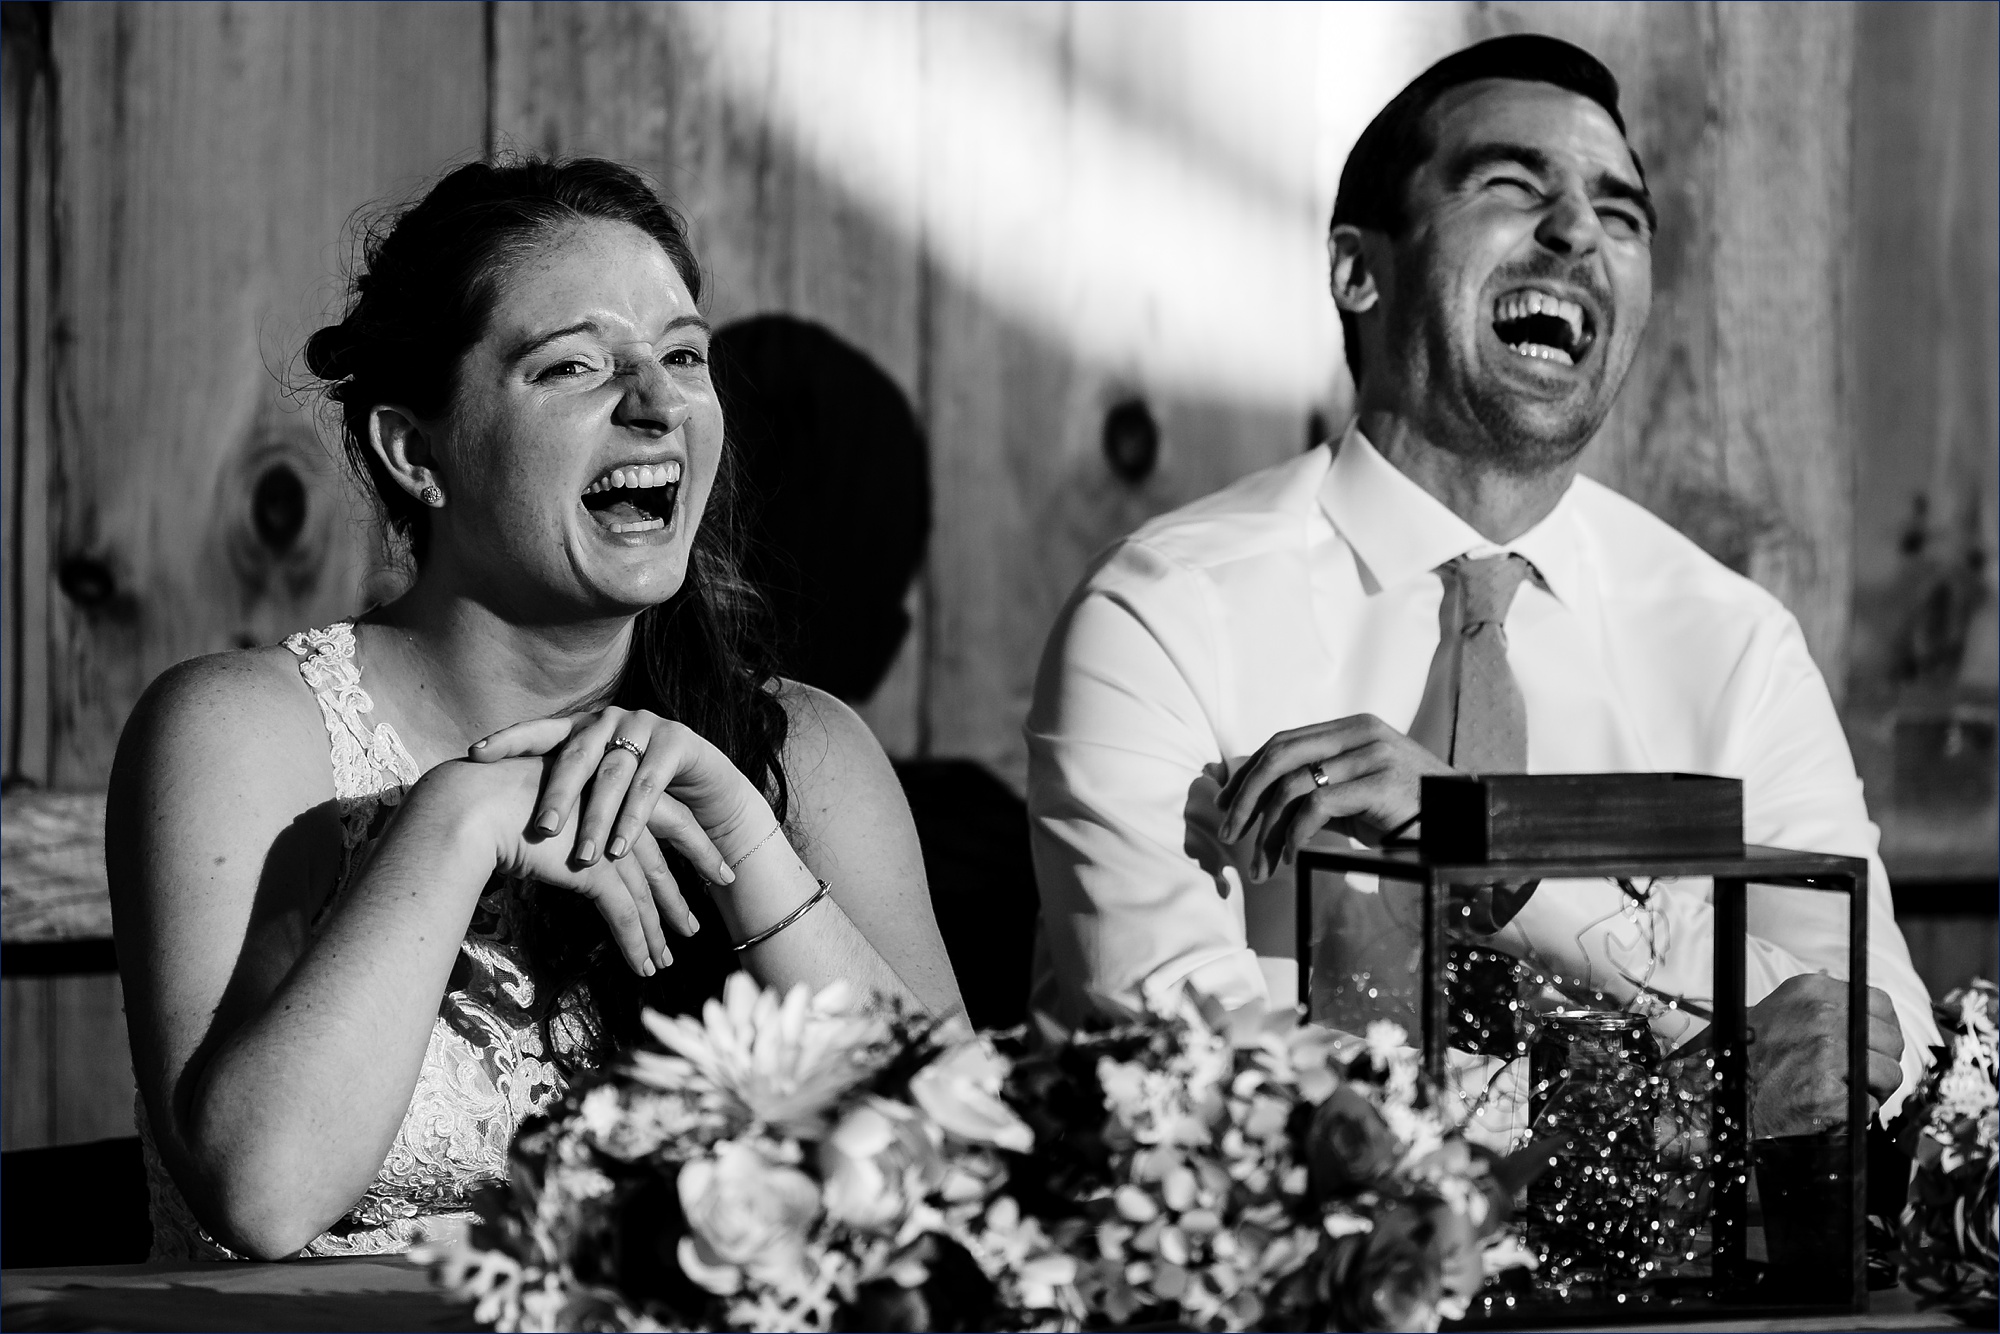 The bride and groom laugh at toasts at their wedding reception